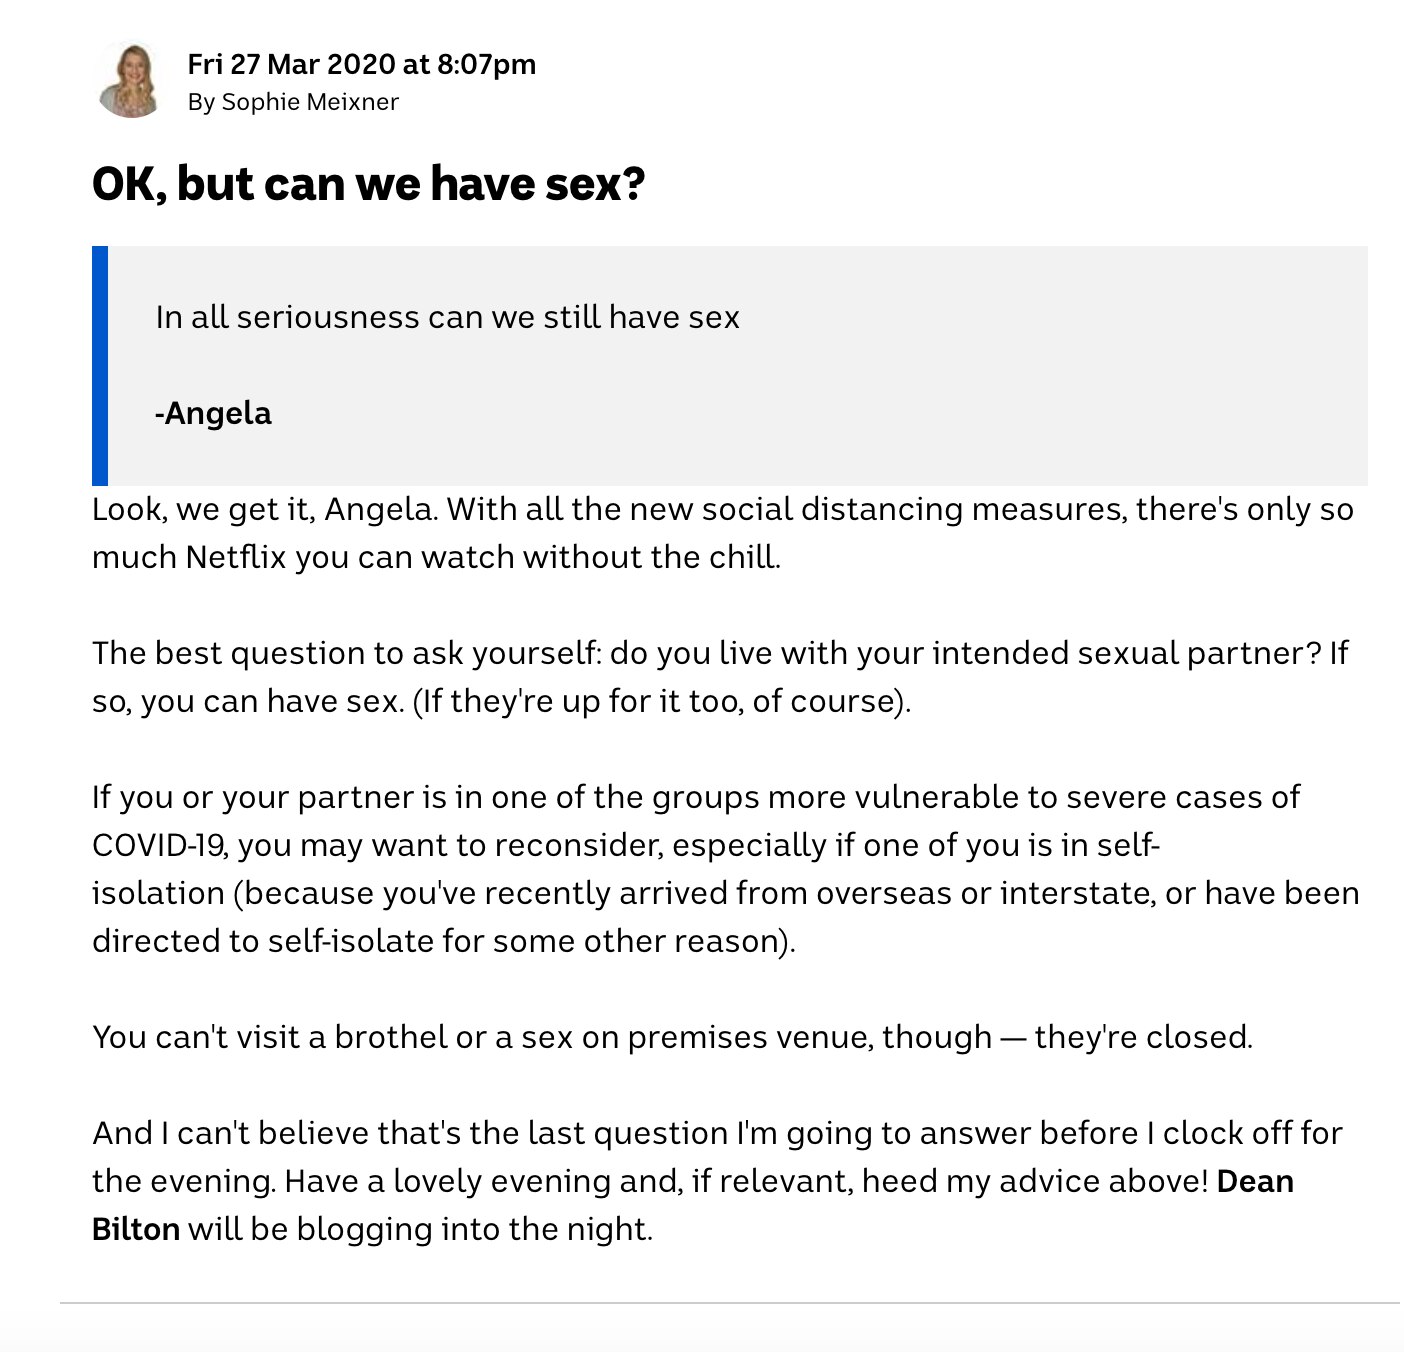 Blog post asking if we can still have sex during coronavirus.